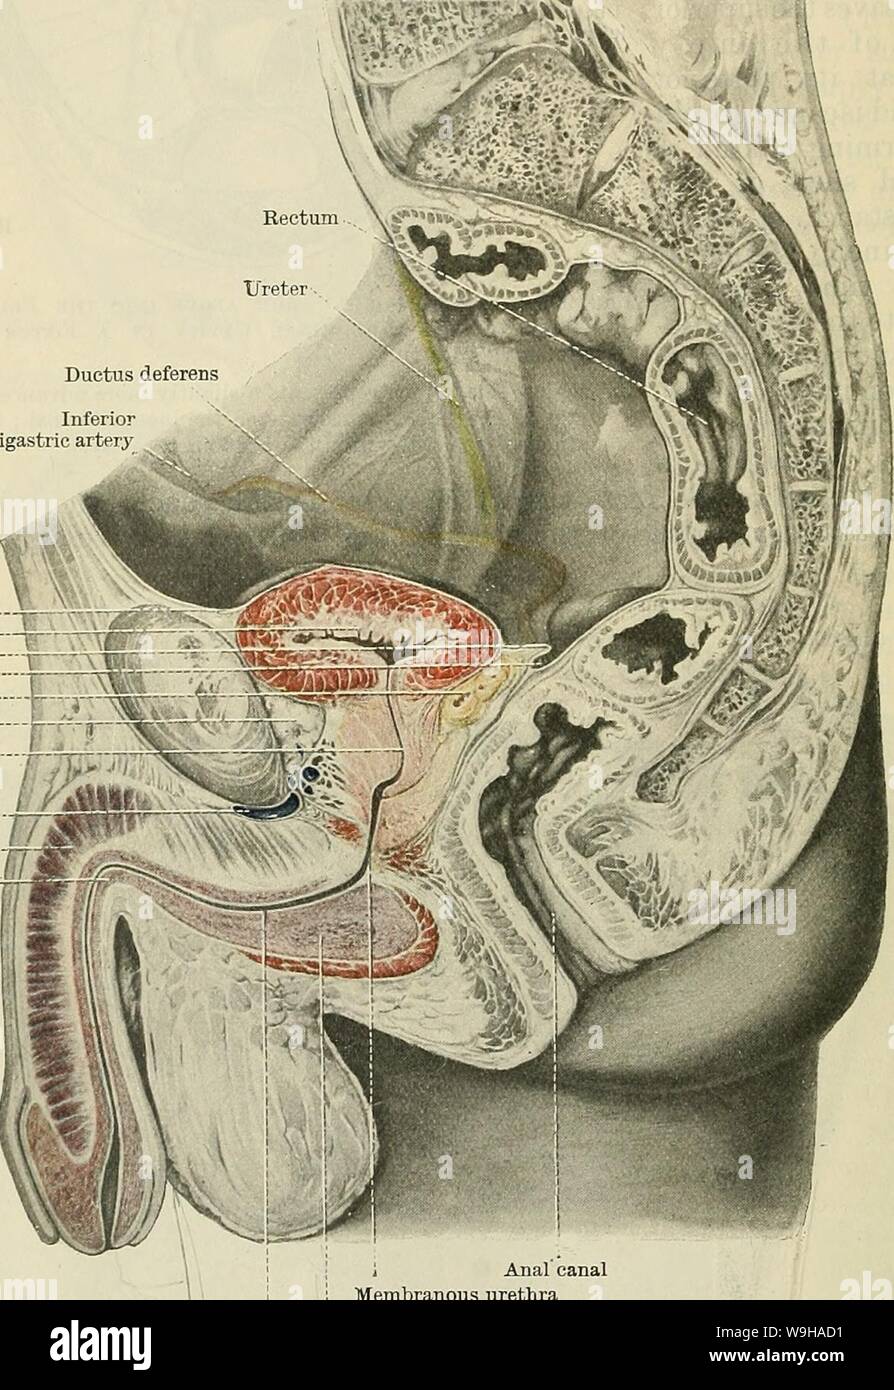 Archive image from page 1315 of Cunningham's Text-book of anatomy (1914). Cunningham's Text-book of anatomy  cunninghamstextb00cunn Year: 1914 ( 1282 THE URINO-GENITAL SYSTEM. basal surface of the contracted and empty bladder receives a covering from the peritoneum, since the seminal vesicles and terminal portions of the ductus de- ferentes intervene as they lie in the anterior wall of the recto-vesical or recto- o-enital pouch. When the bladder is distended the posterior border, separating the upper and basal surfaces, is rounded out, and the peritoneum forming the horizontal shelf, just desc Stock Photo